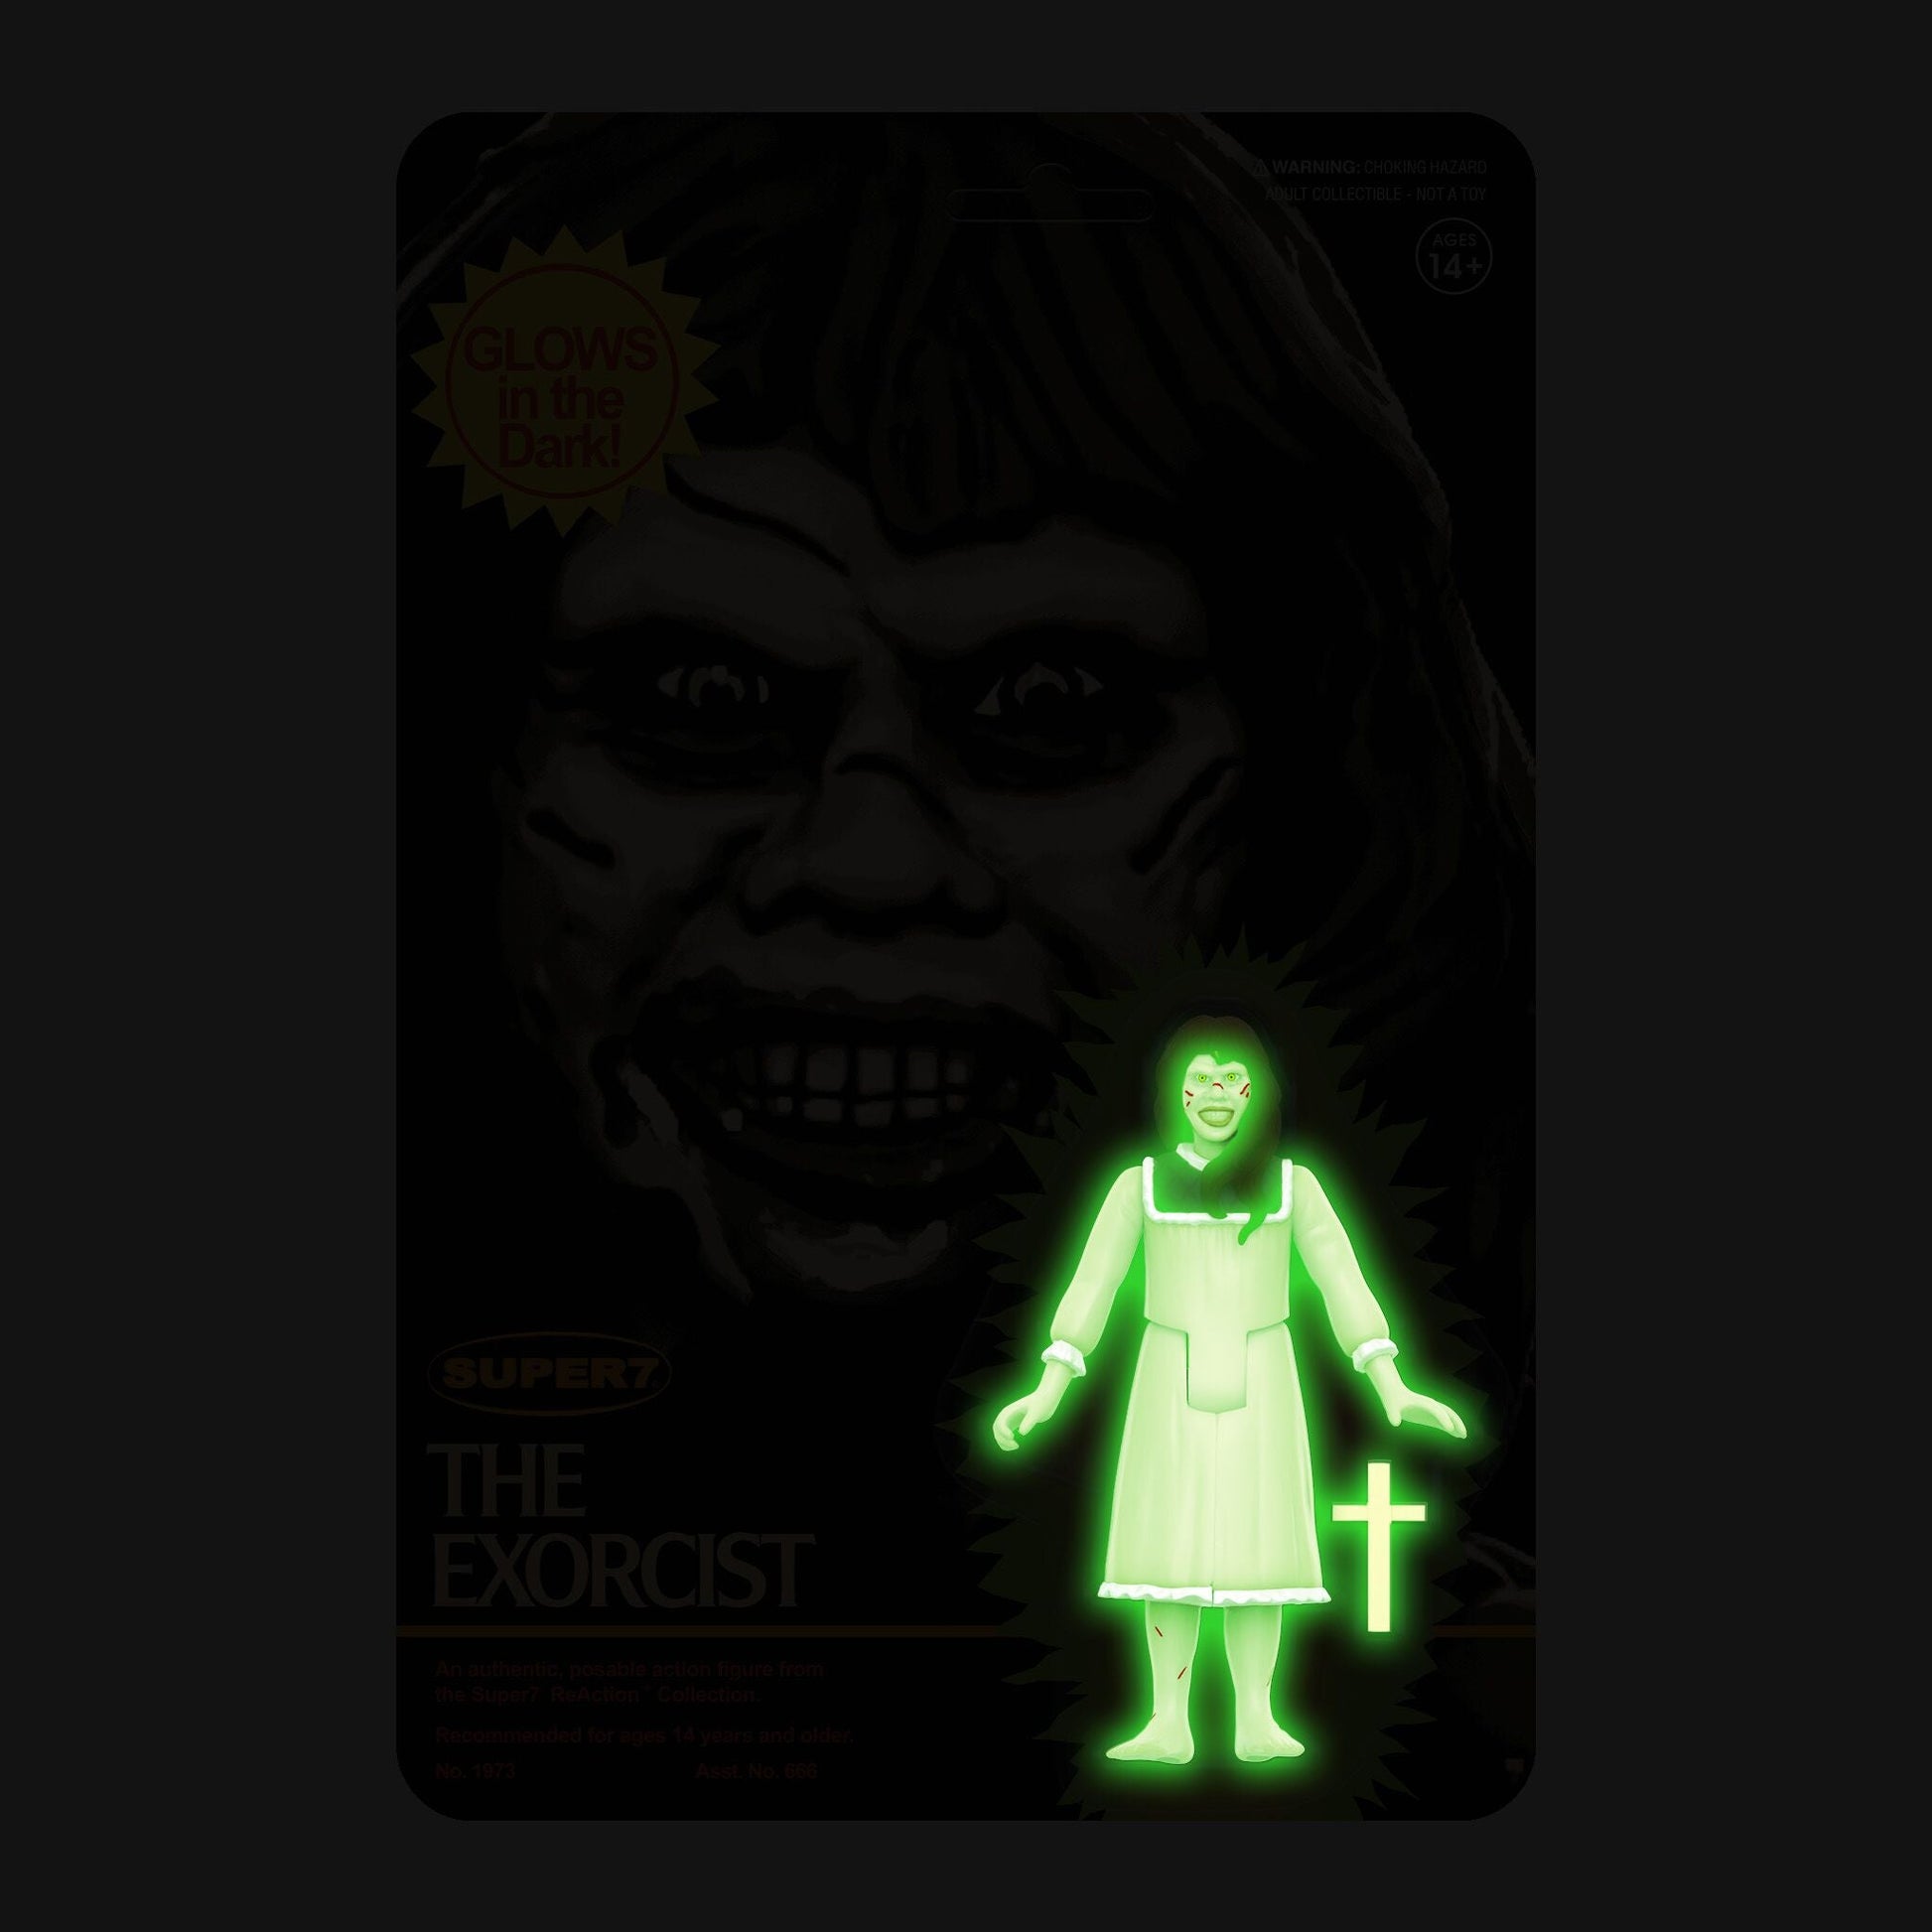 Super7 The Exorcist Reaction Regan (Monster Glow) Action Figure - COMING SOON